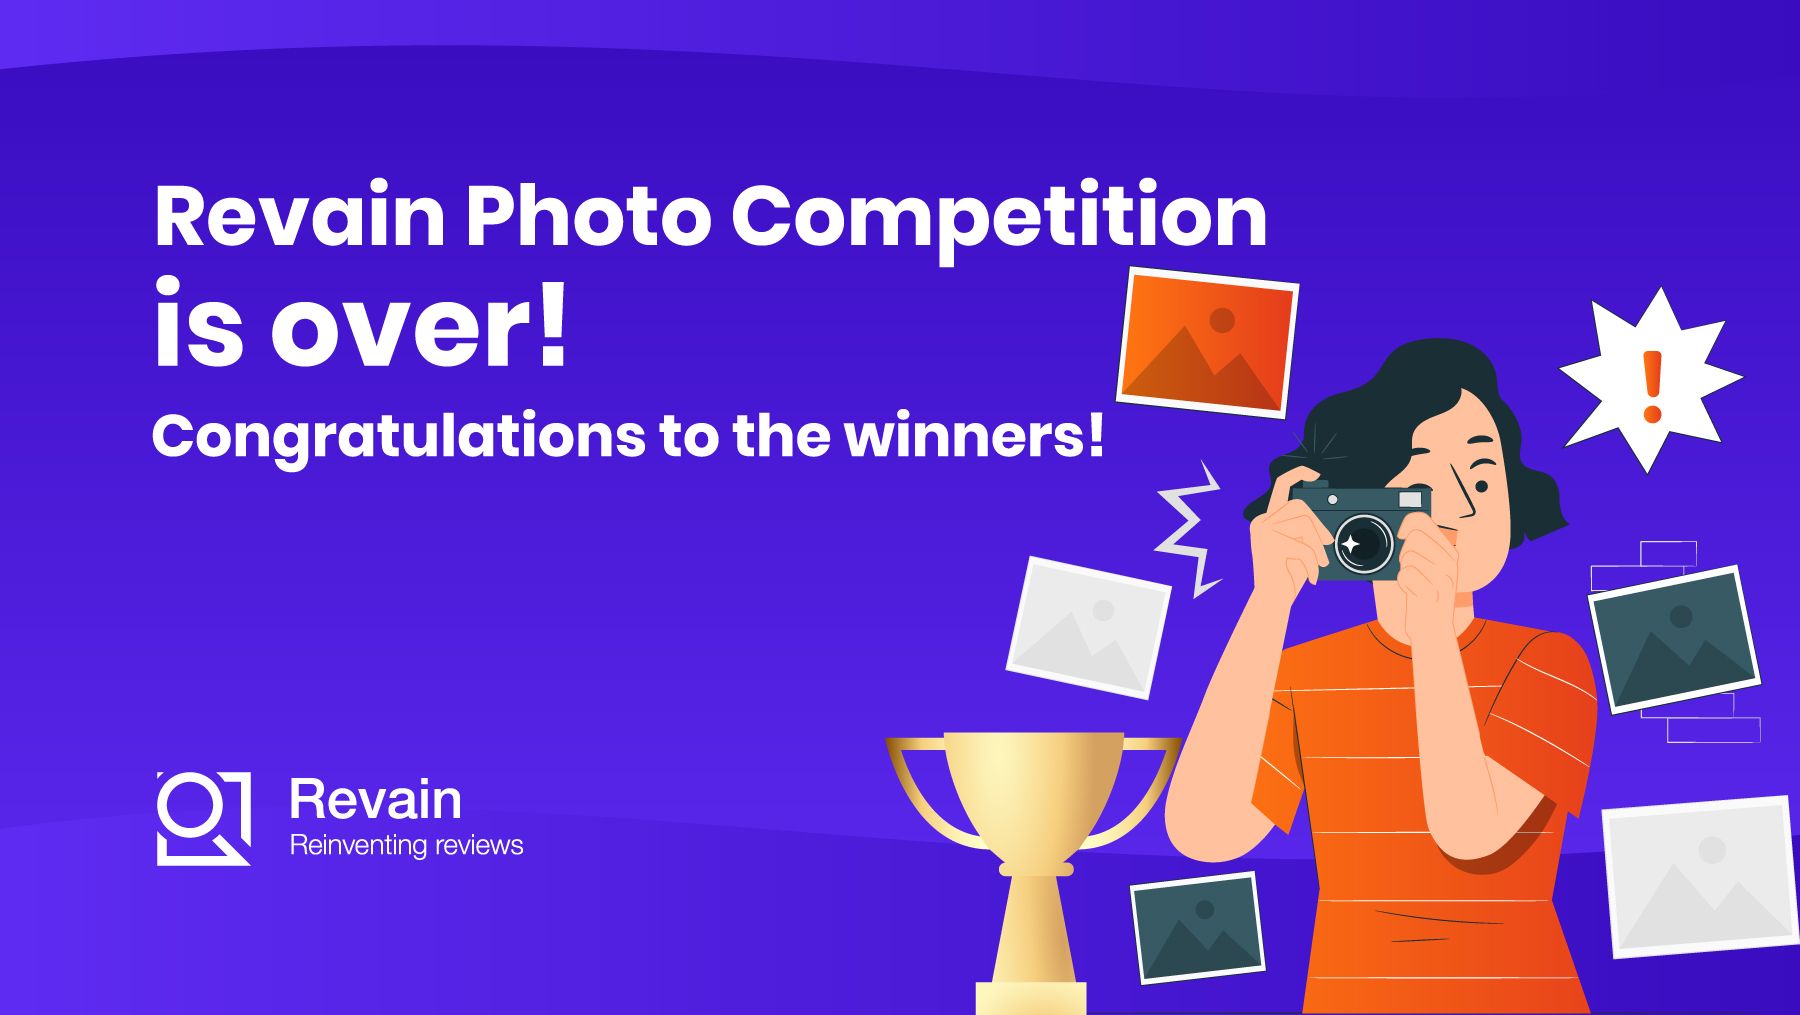 Winners of the Photo Competition